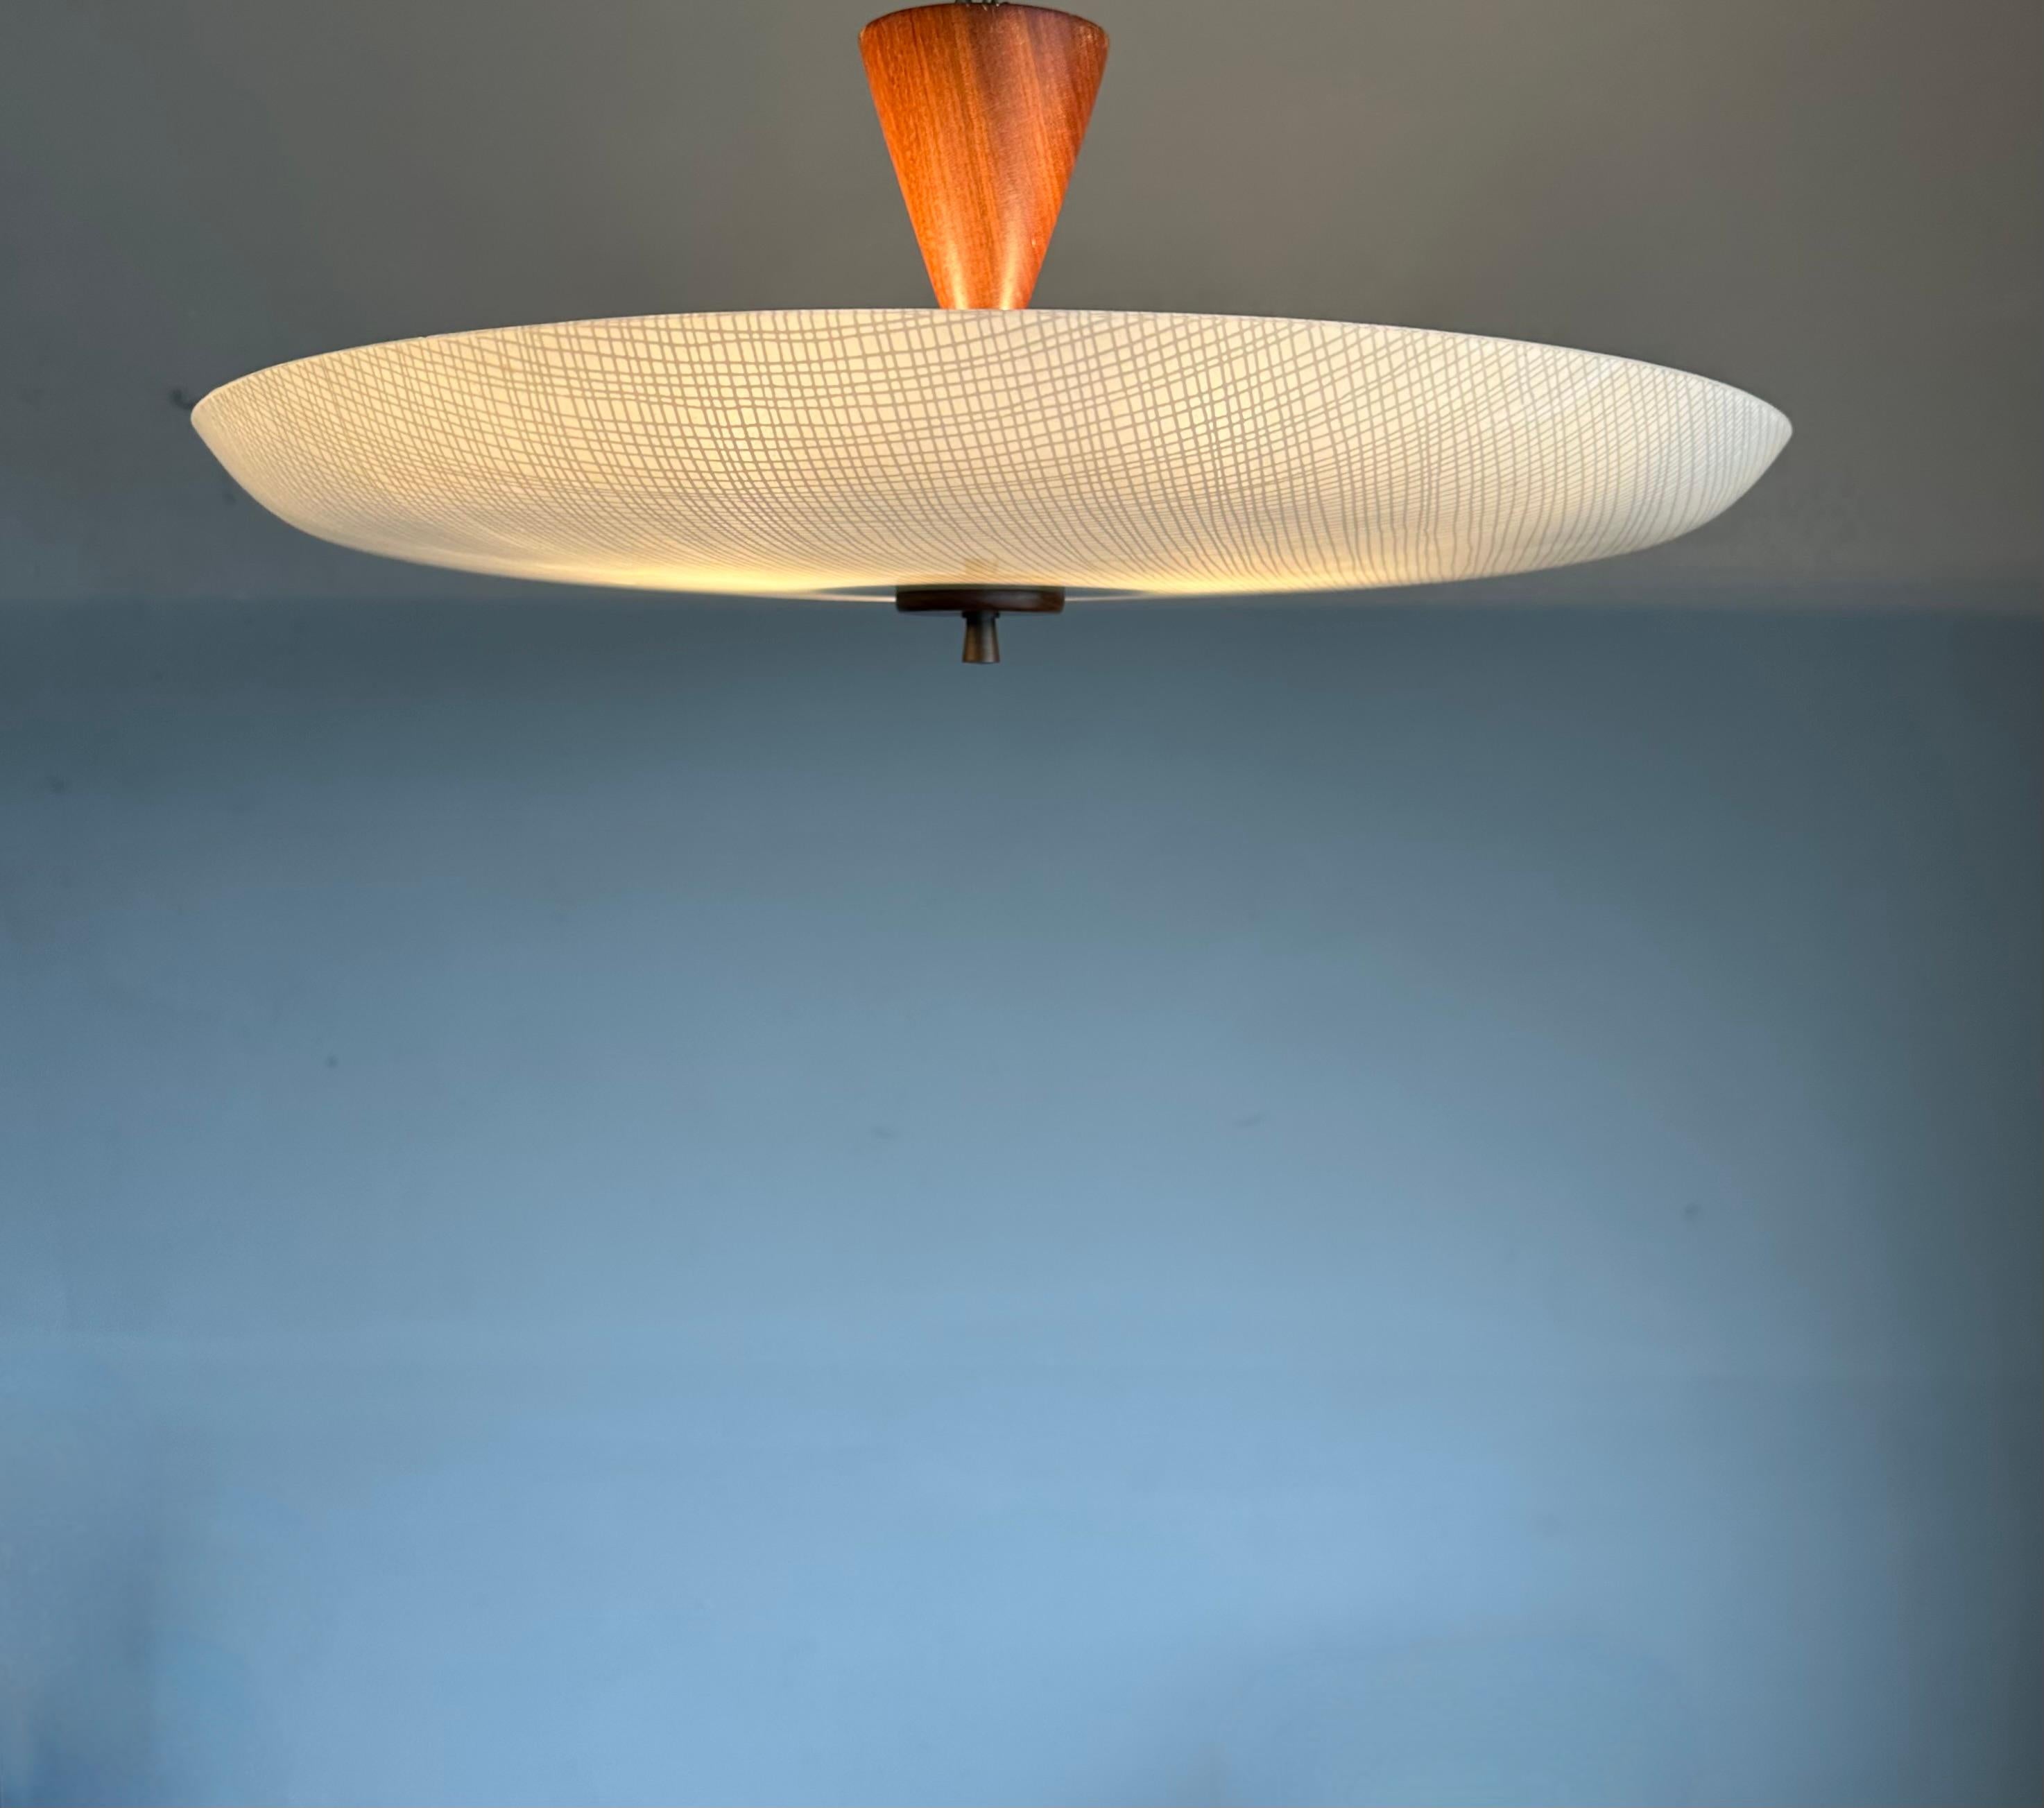 Large Superb Condition 3 Light Midcentury Modern Glass Flush Mount with Teakwood In Excellent Condition For Sale In Lisse, NL